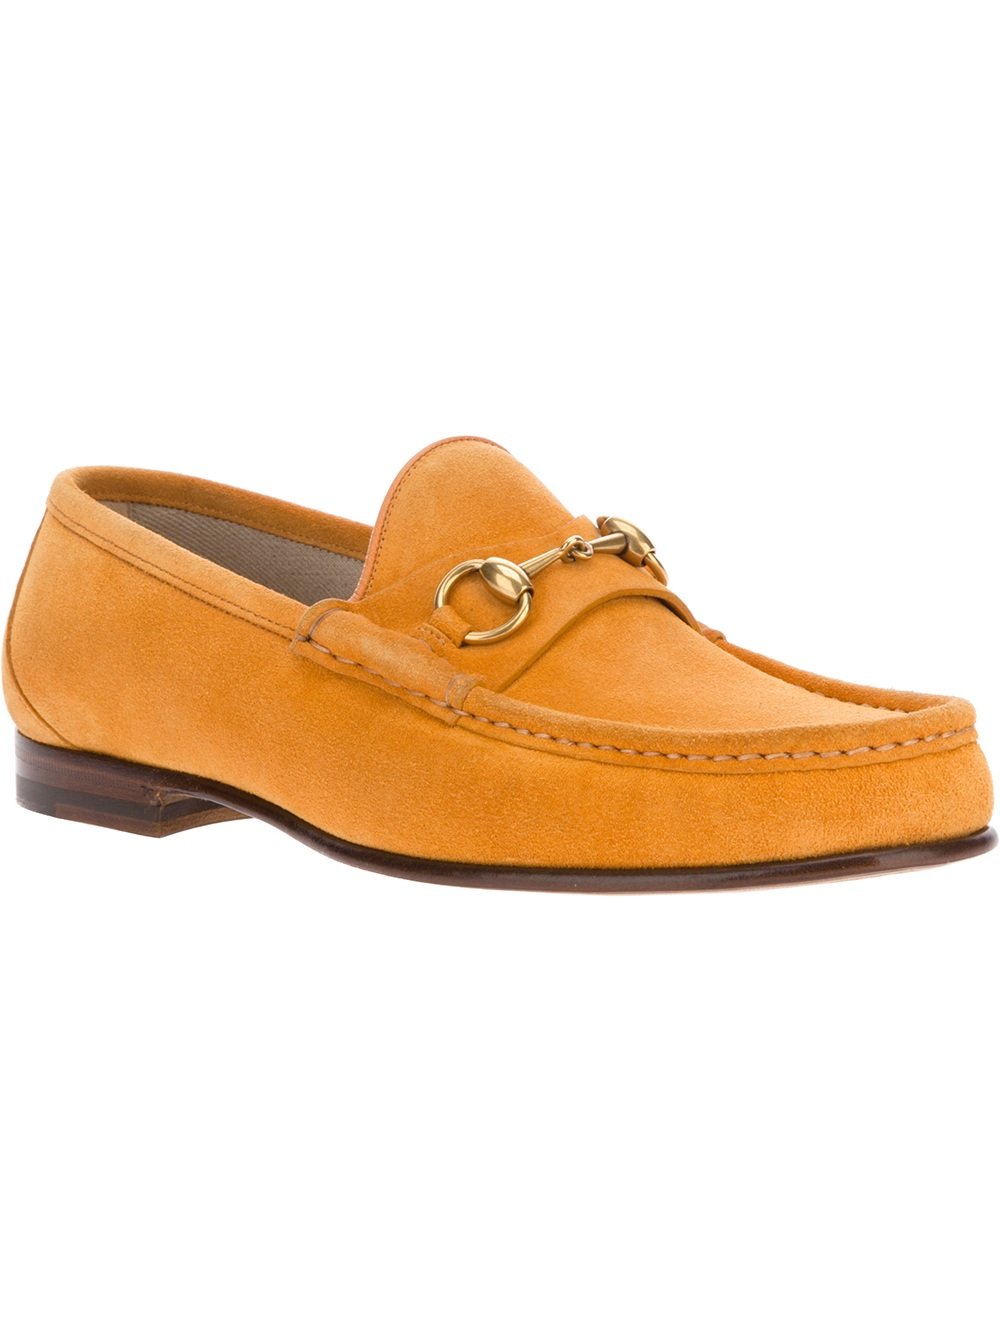 Gucci Suede Loafers in Orange for Men 